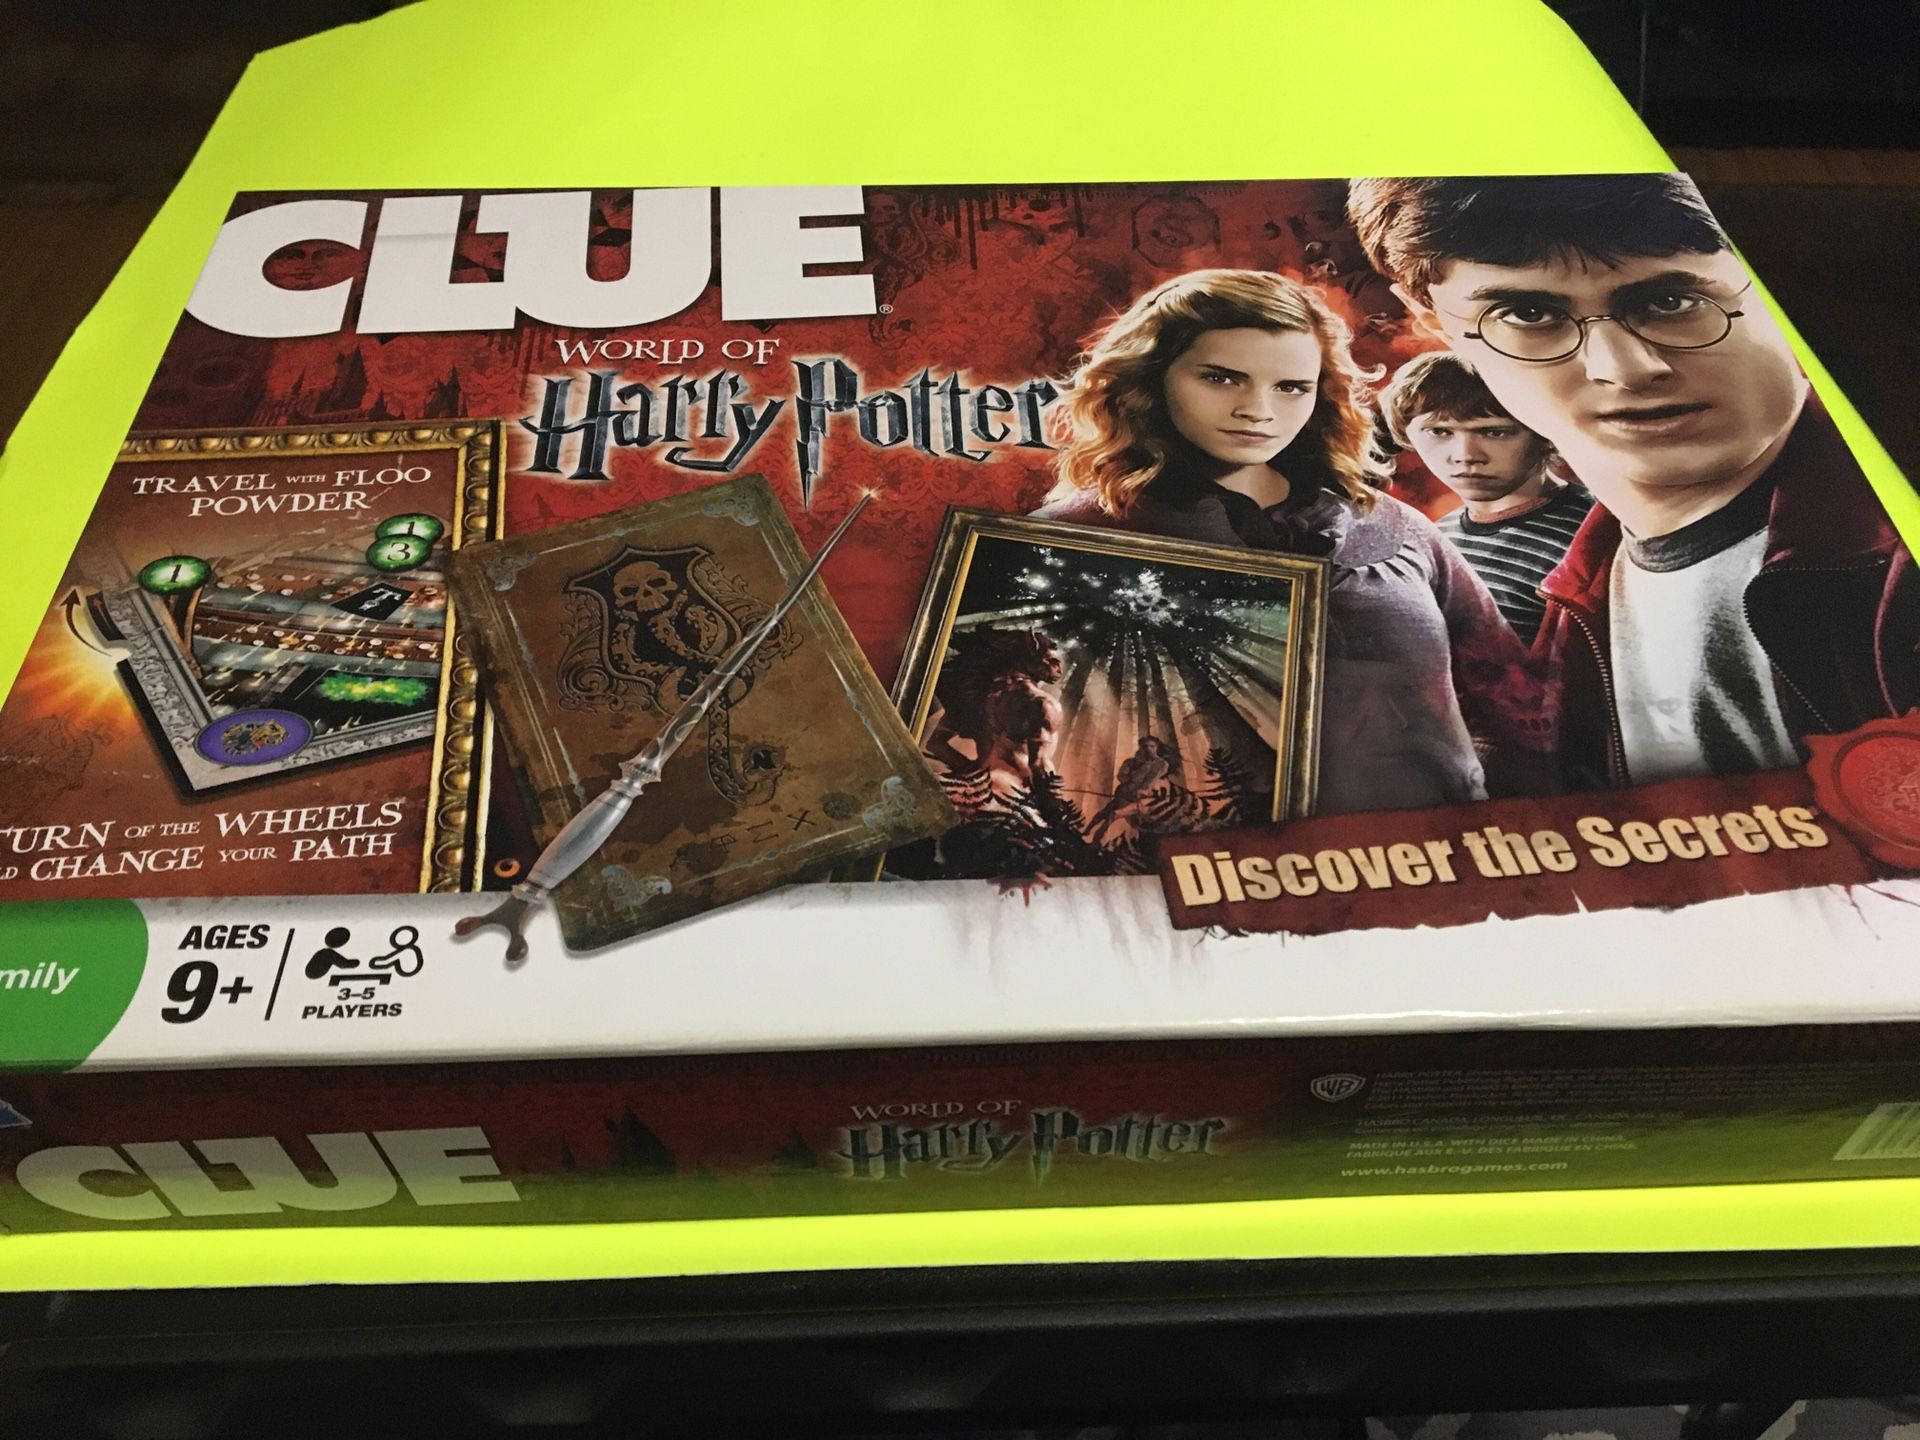 World of Harry Potter clue board game